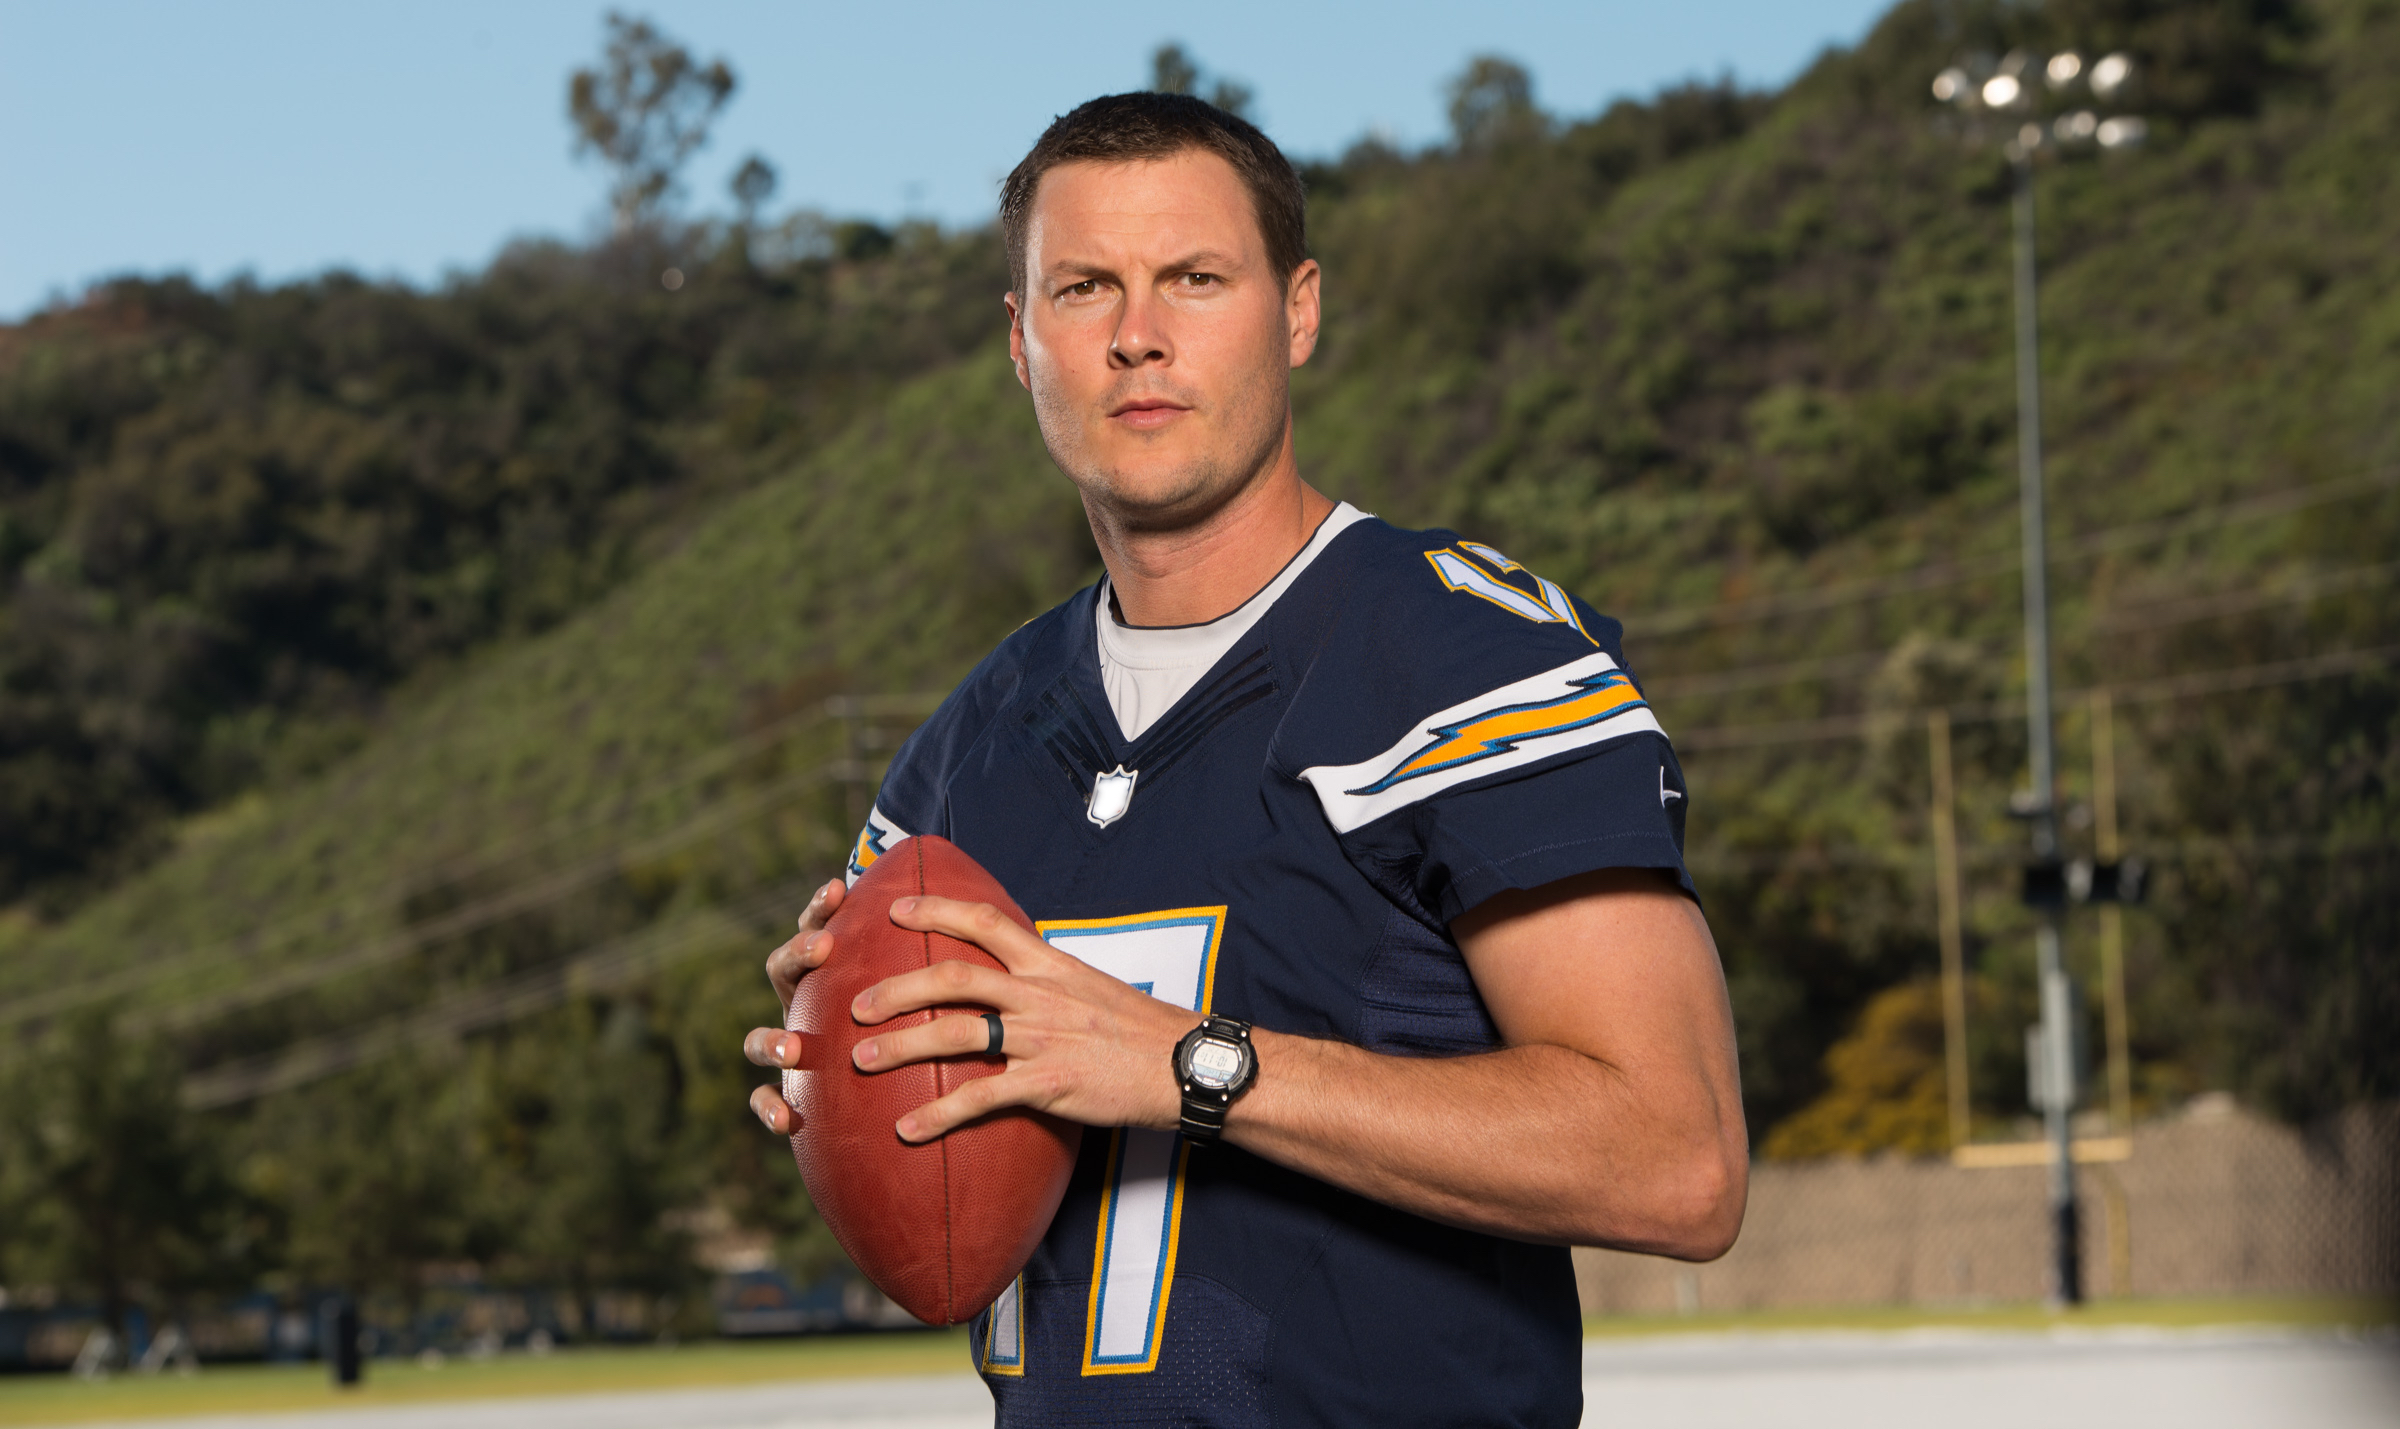 Philip Rivers Bio, Kids, Wife and Other Family Members, Stats, Age, Net Worth